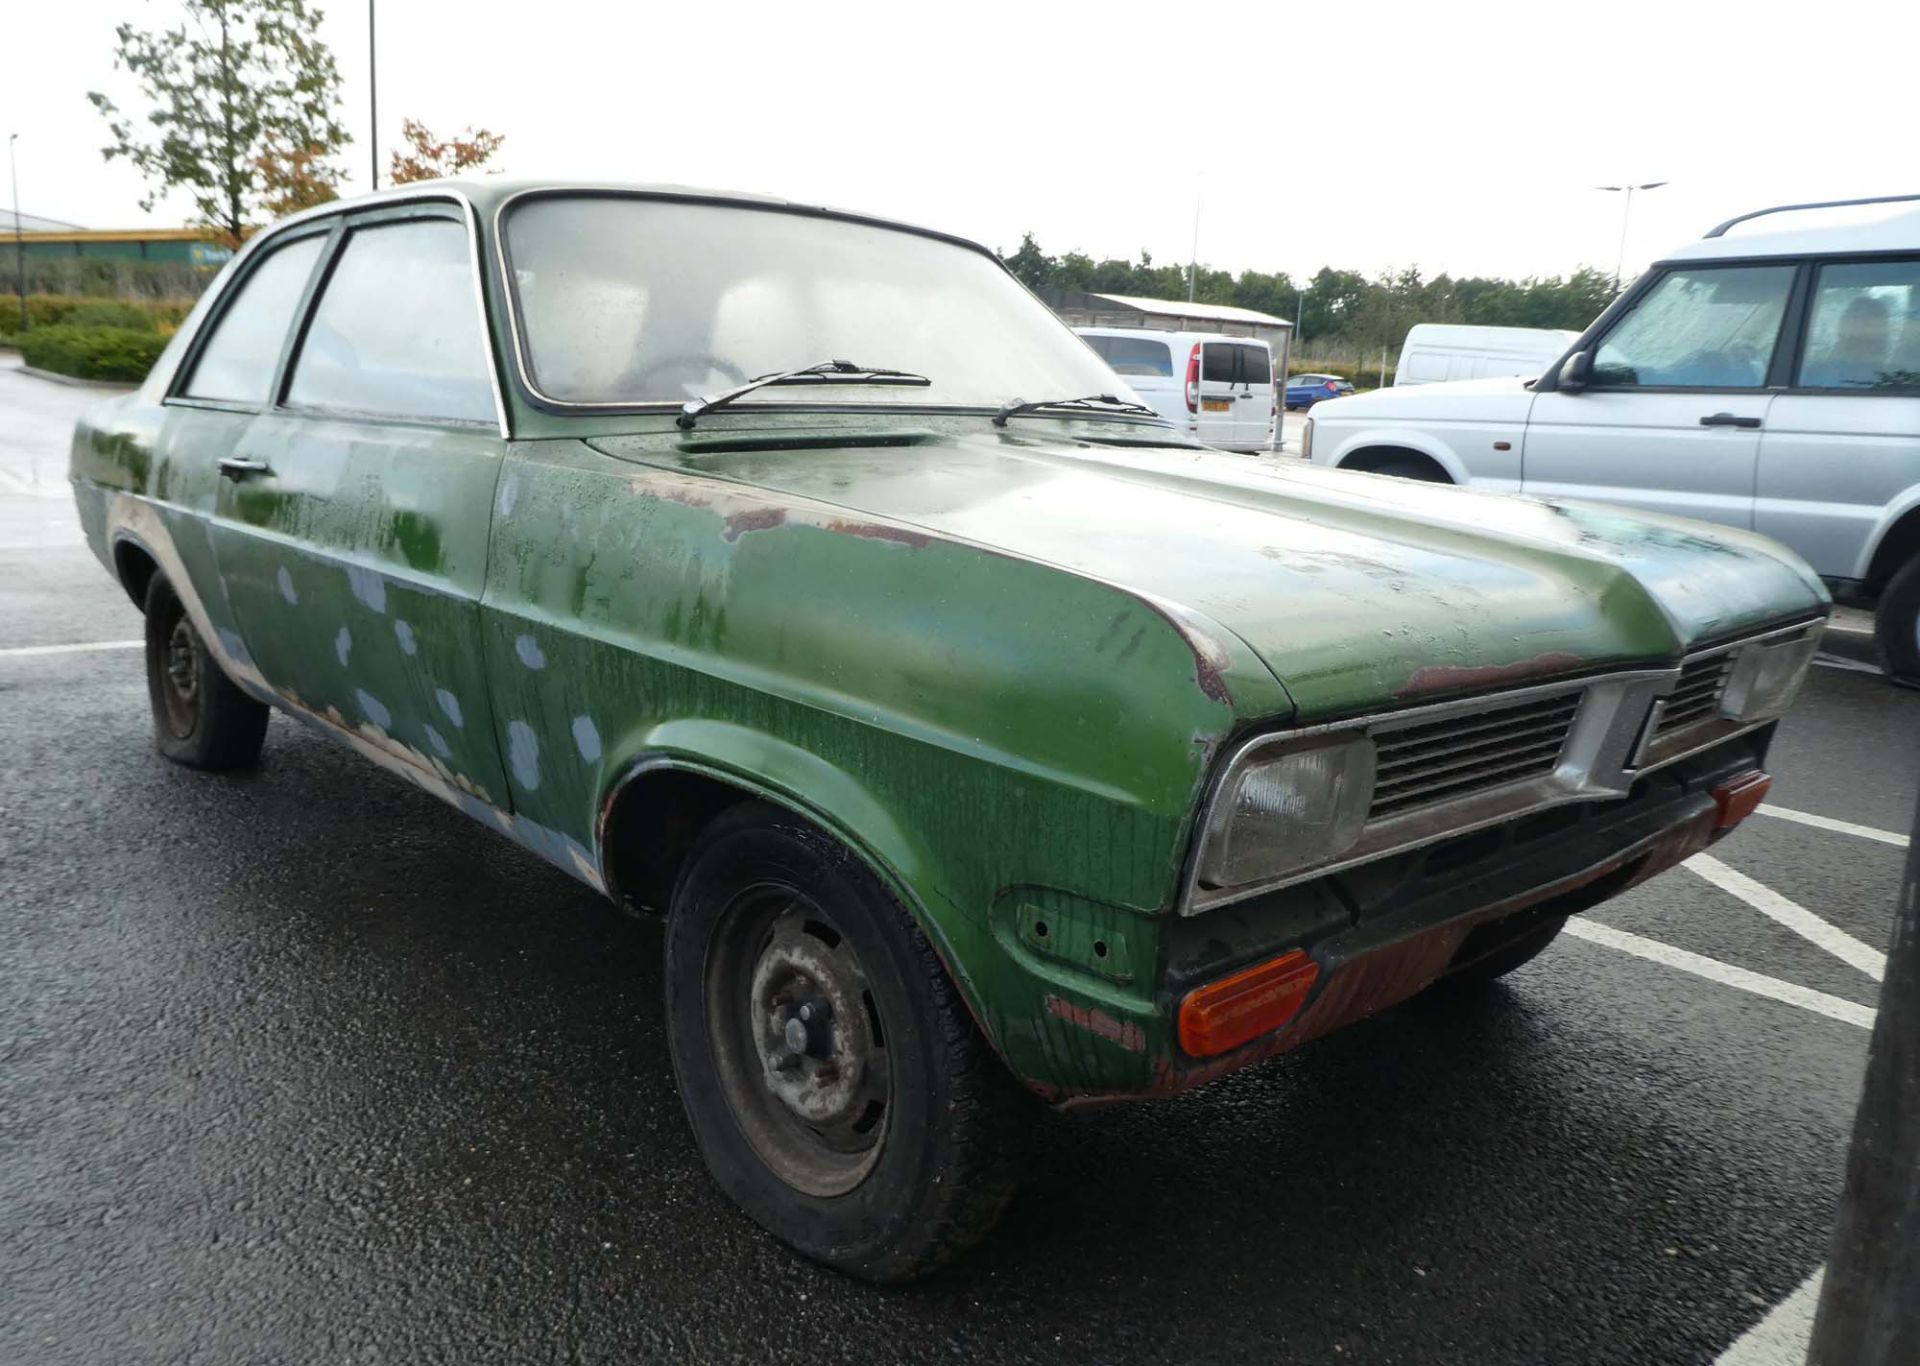 ER0 774K Vauxhall Viva 1256 Saloon in green, 1256cc, first registered 07.06.1972, petrol, showing - Image 3 of 10